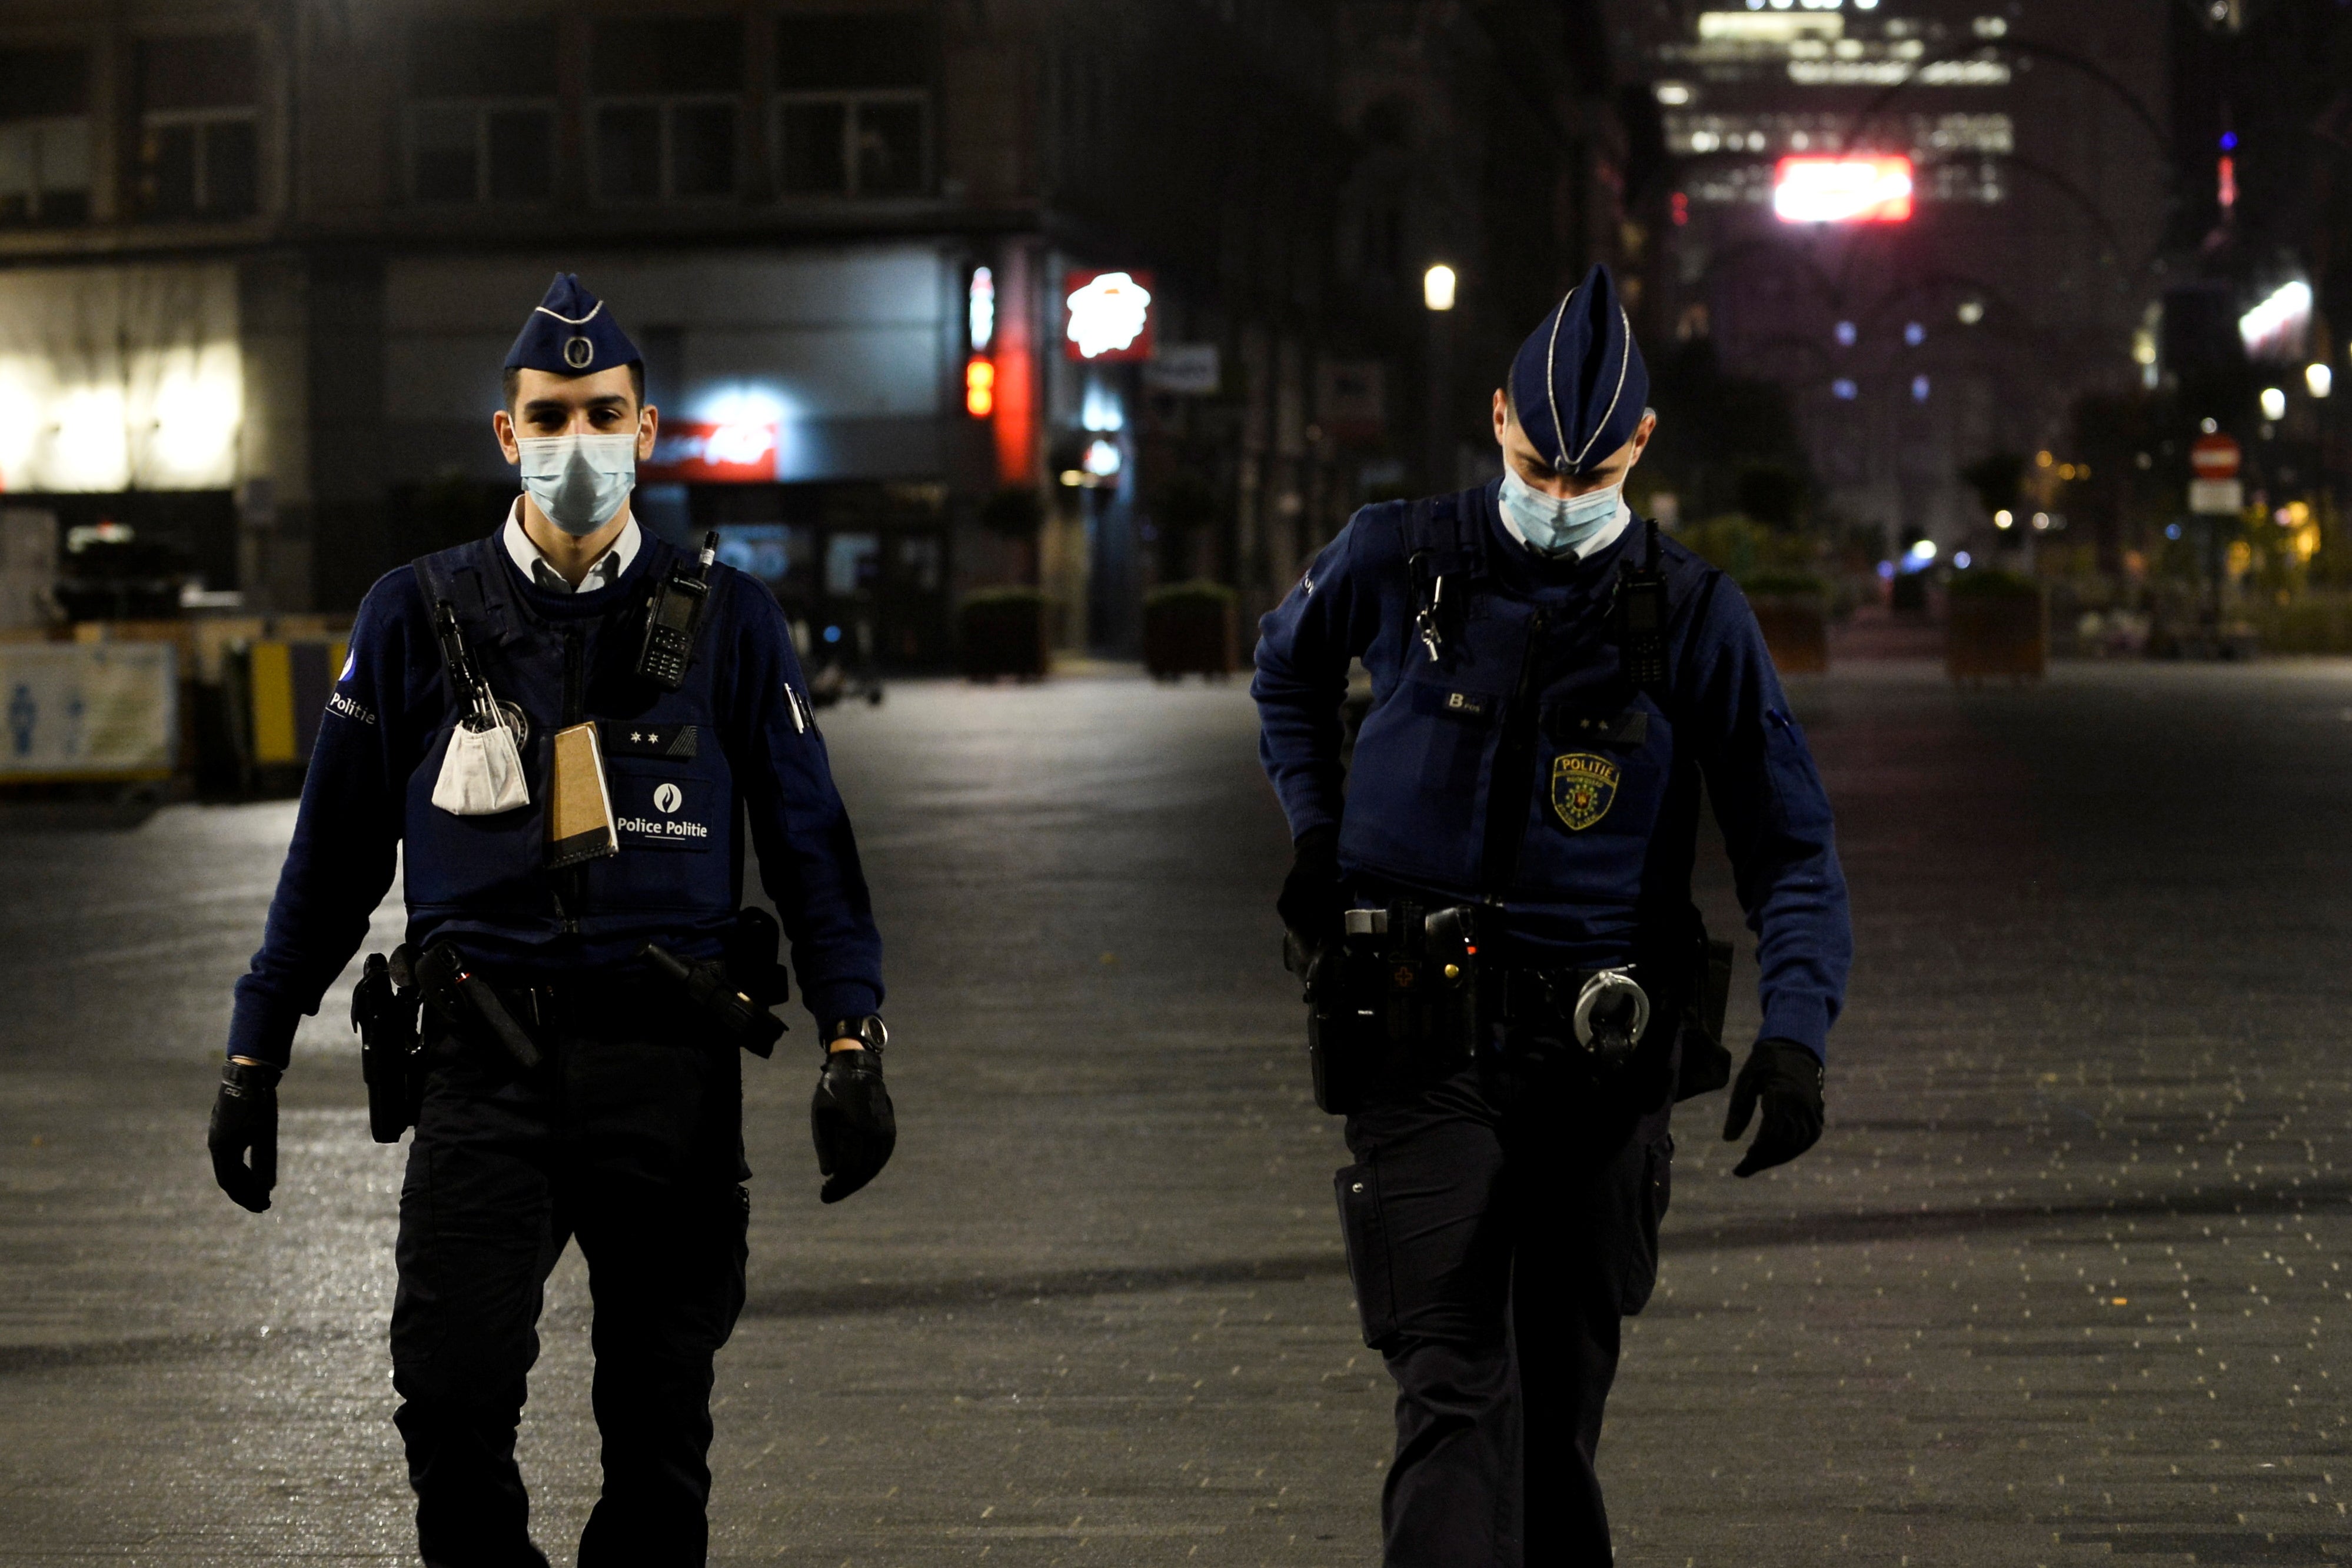 Belgian police break up 52 person orgy in a house next door to a Covid clinic The Independent